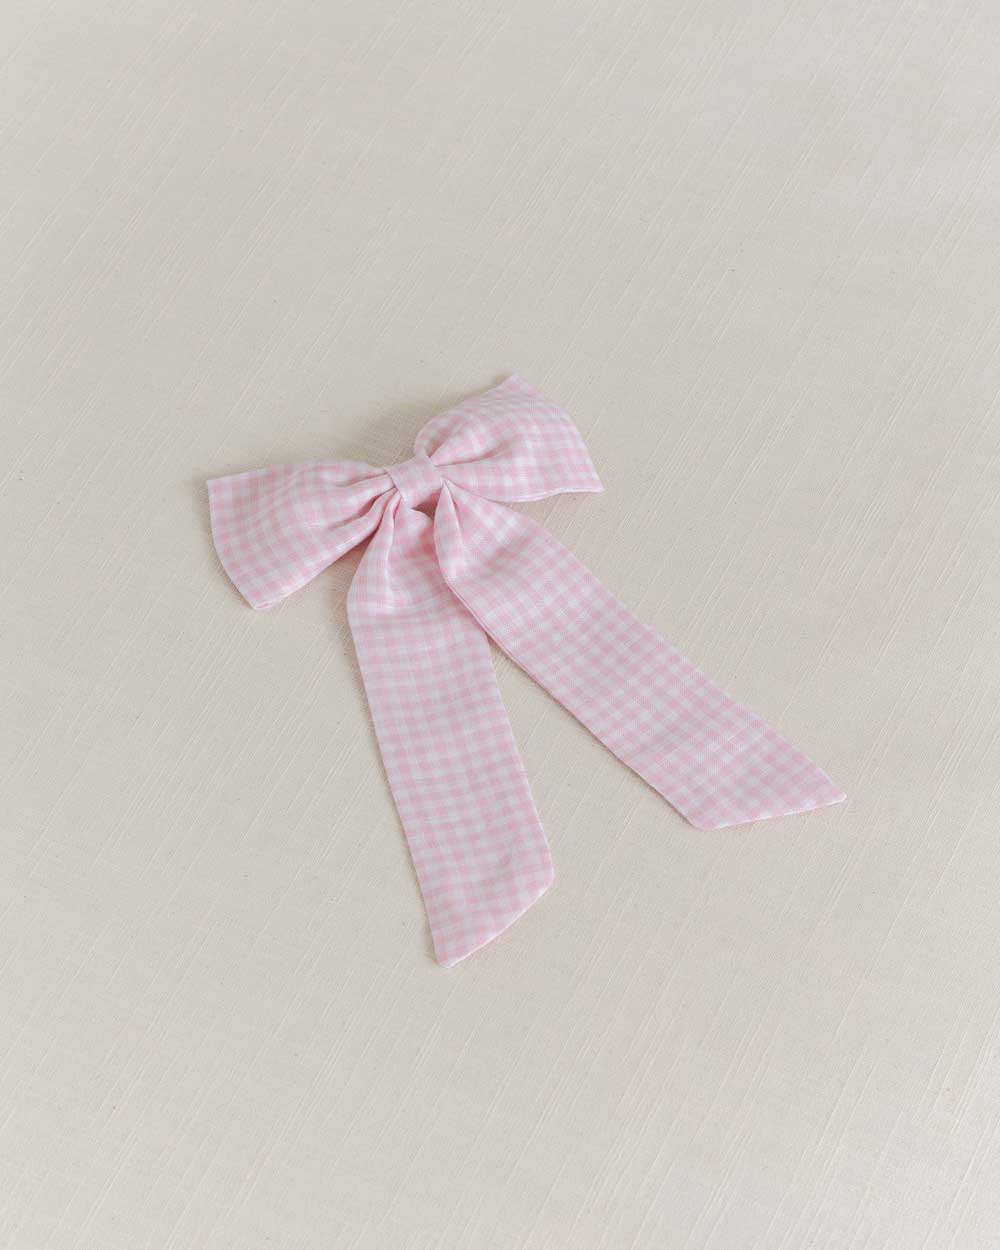 THE PINK GINGHAM CLASSIC BOW